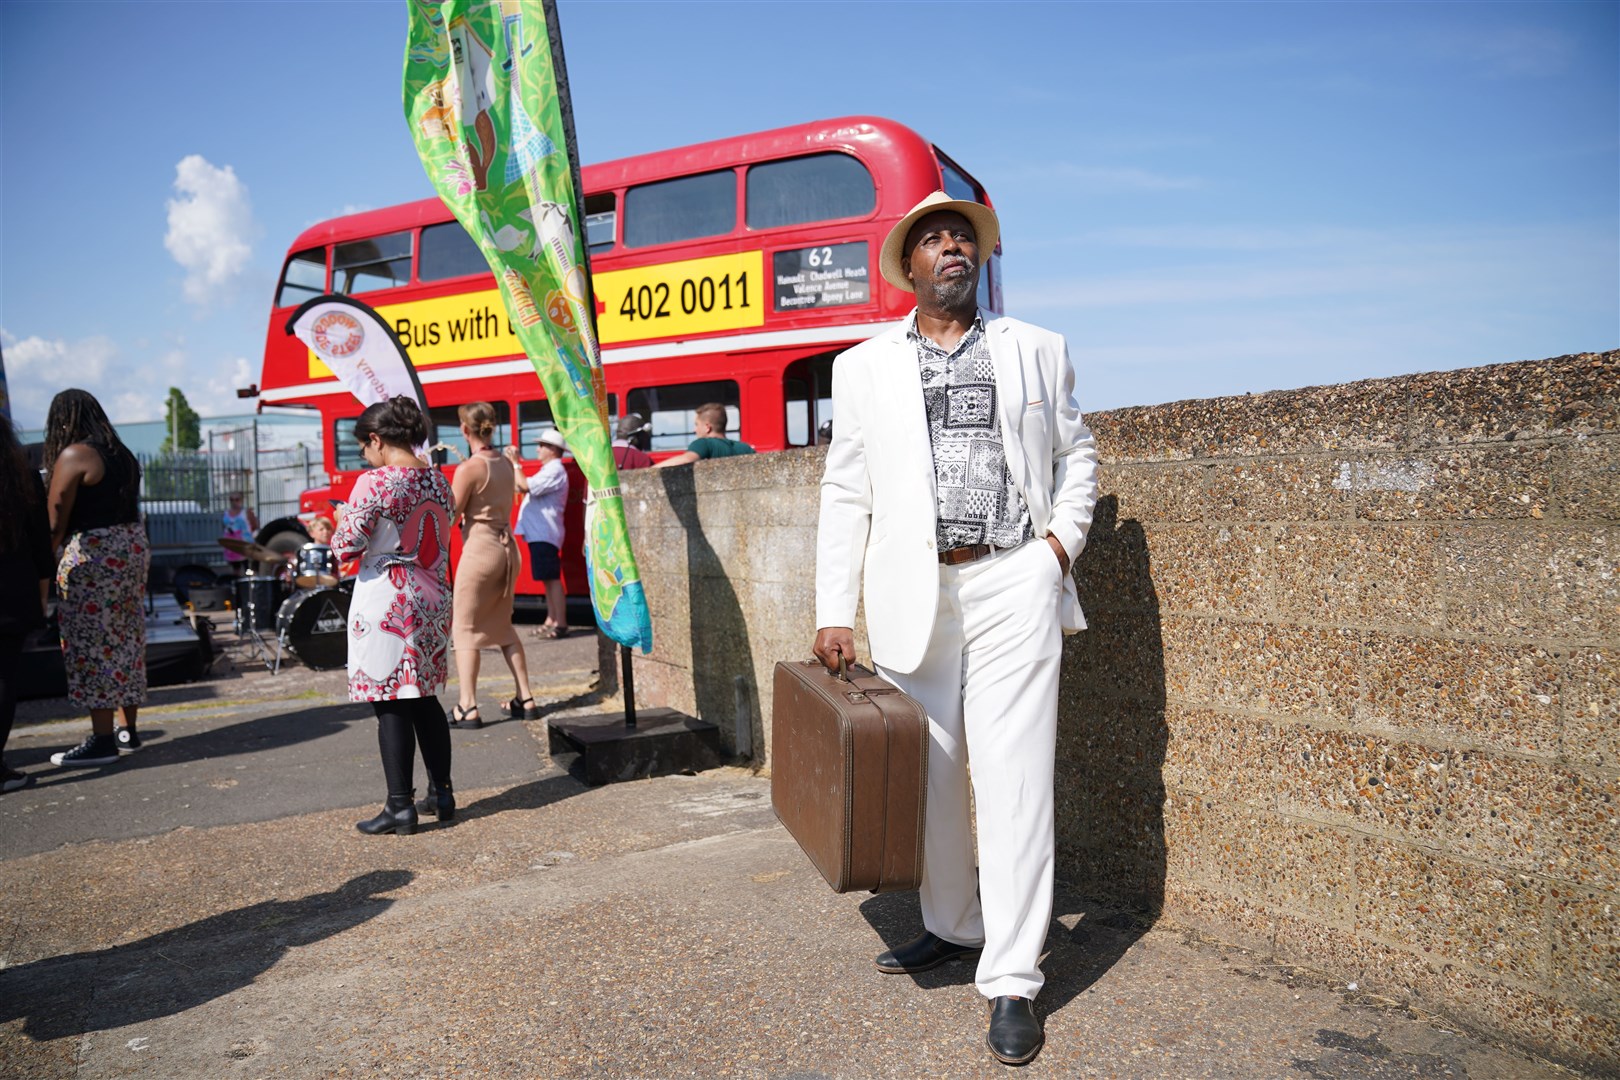 A man carries a single vintage suitcase to represent the journey many of the Windrush Generation made to answer the UK’s call for workers (Lucy North/PA)